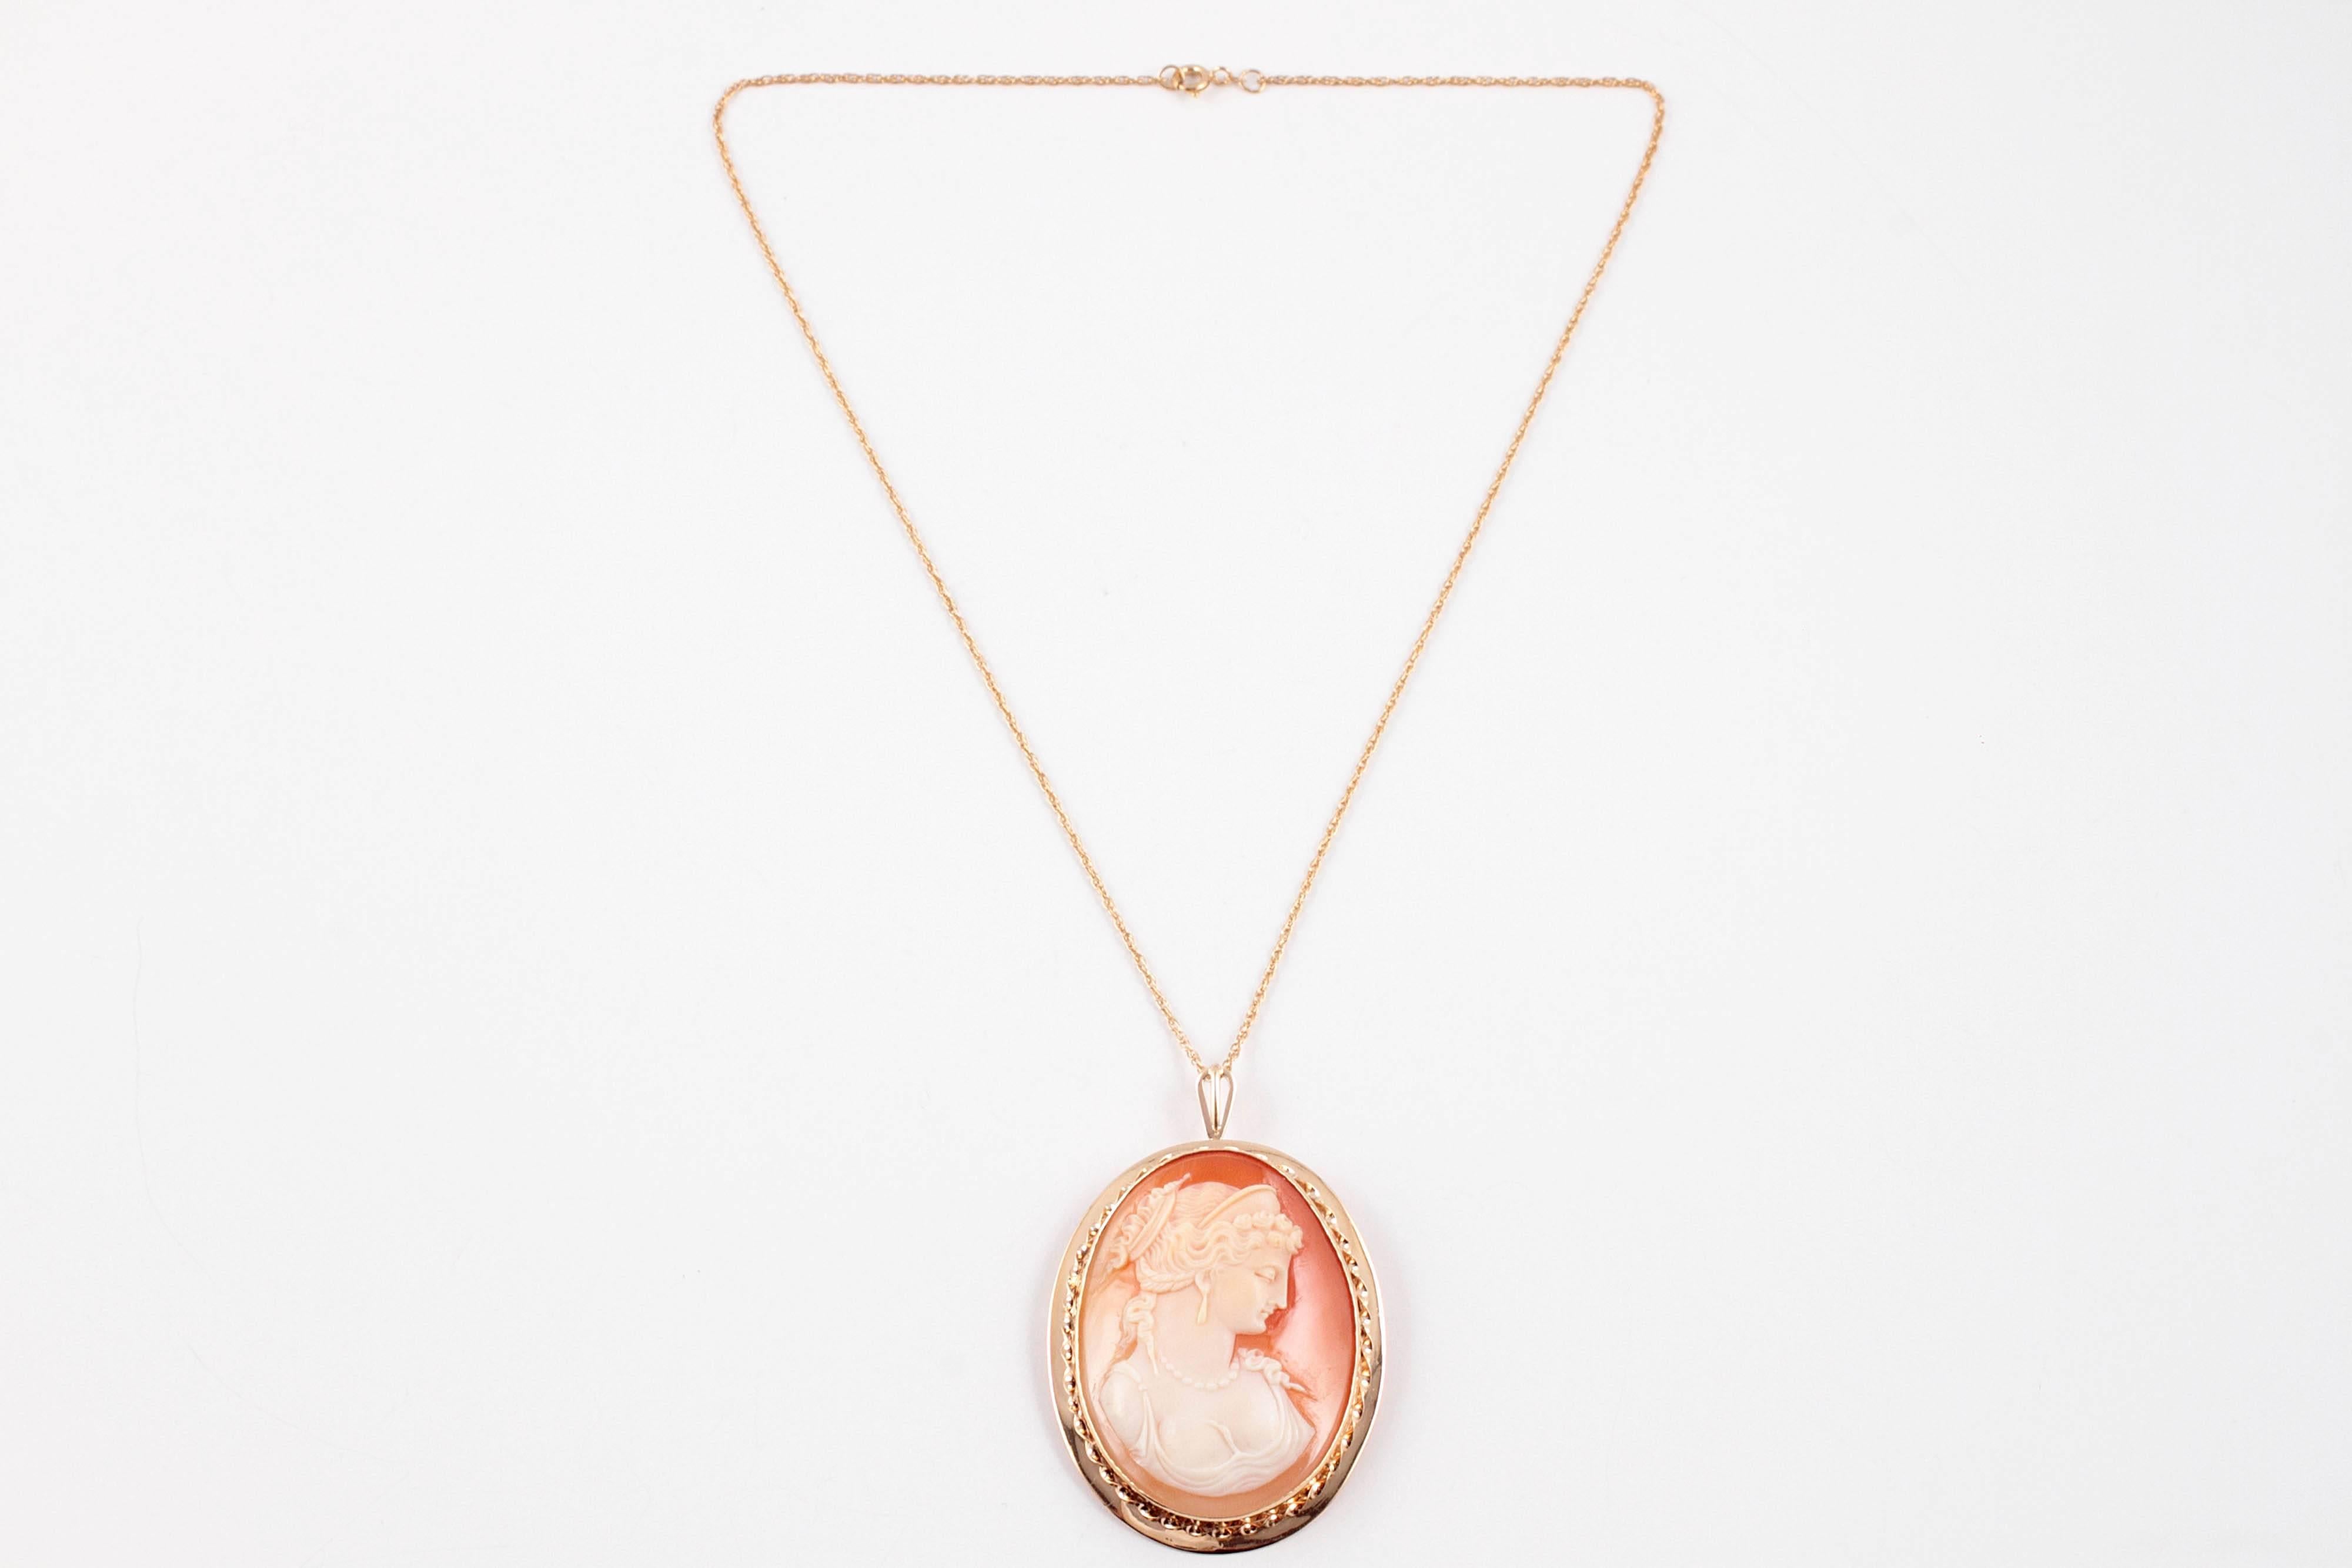 Vintage cameo pendant in 14 karat yellow gold on 18 inch gold filled chain.  Can also be worn as a pin.